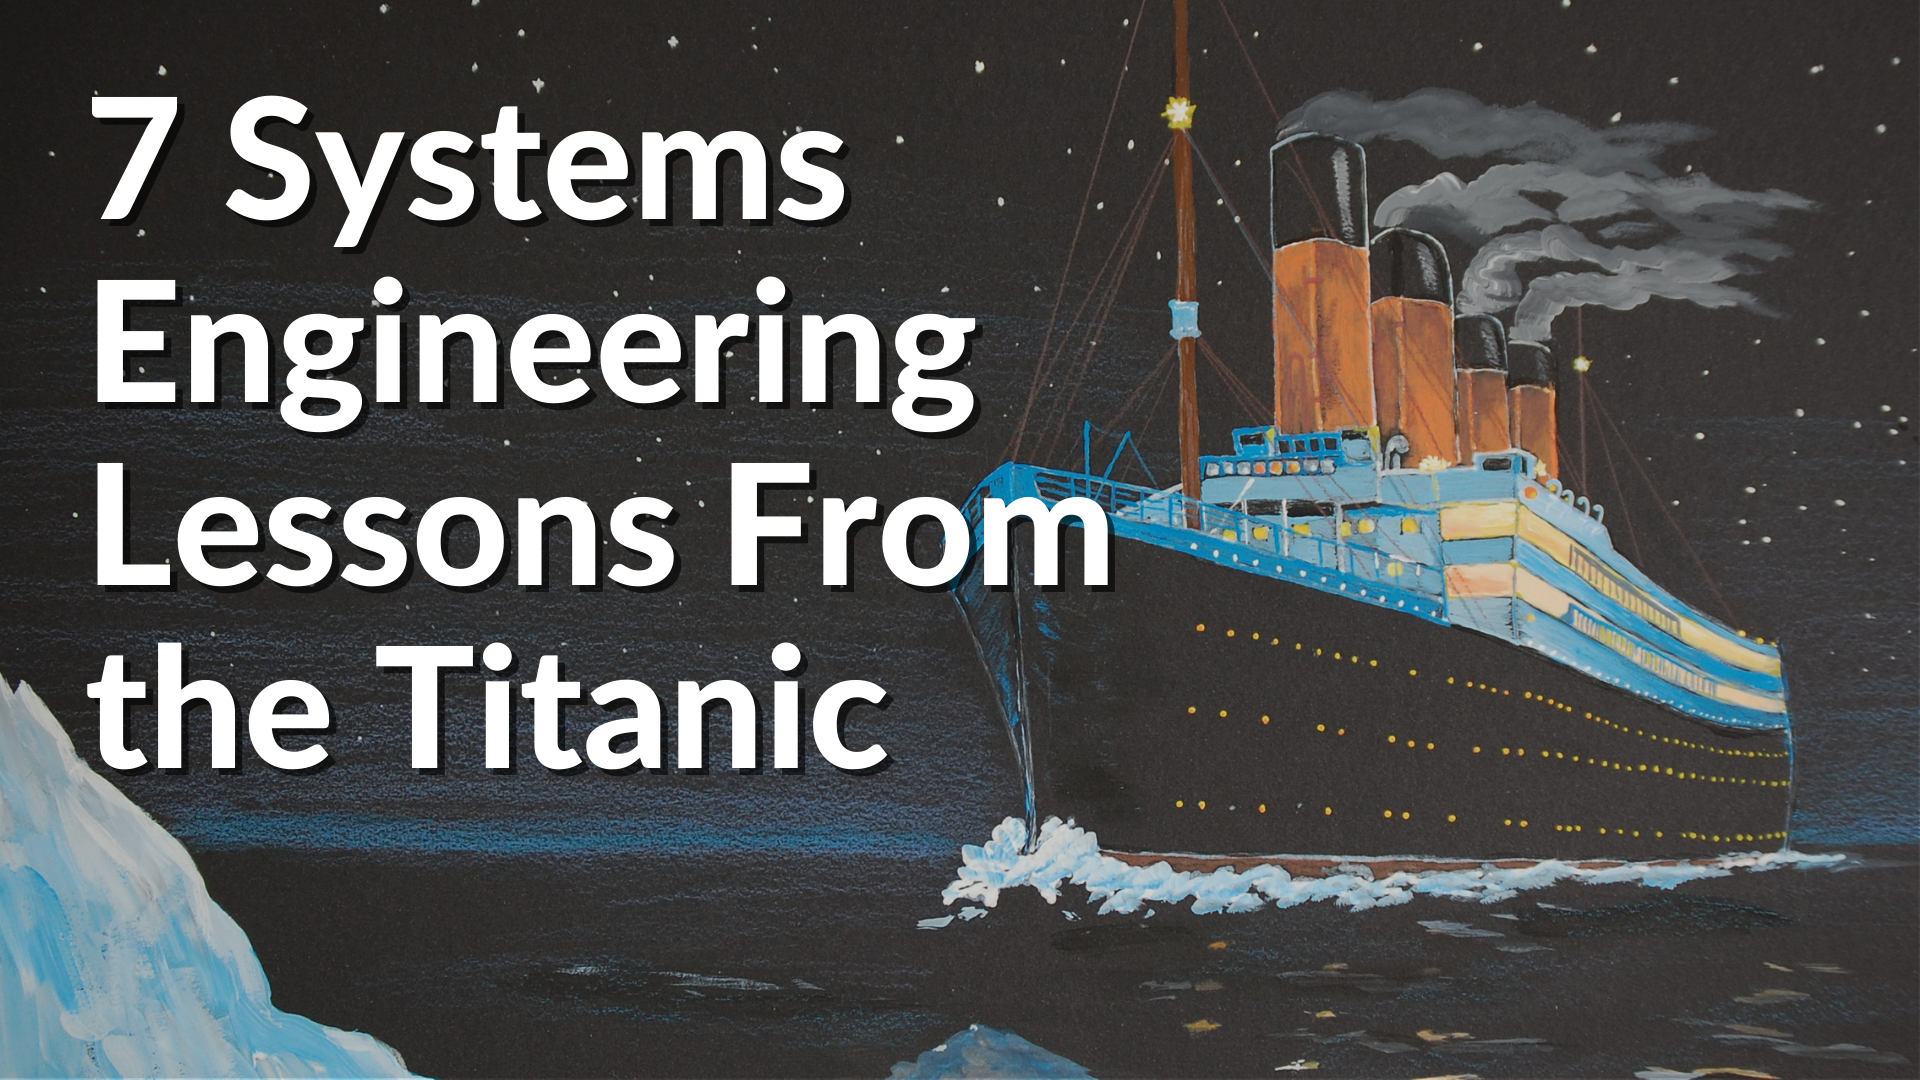 7 Systems Engineering Lessons From the Titanic